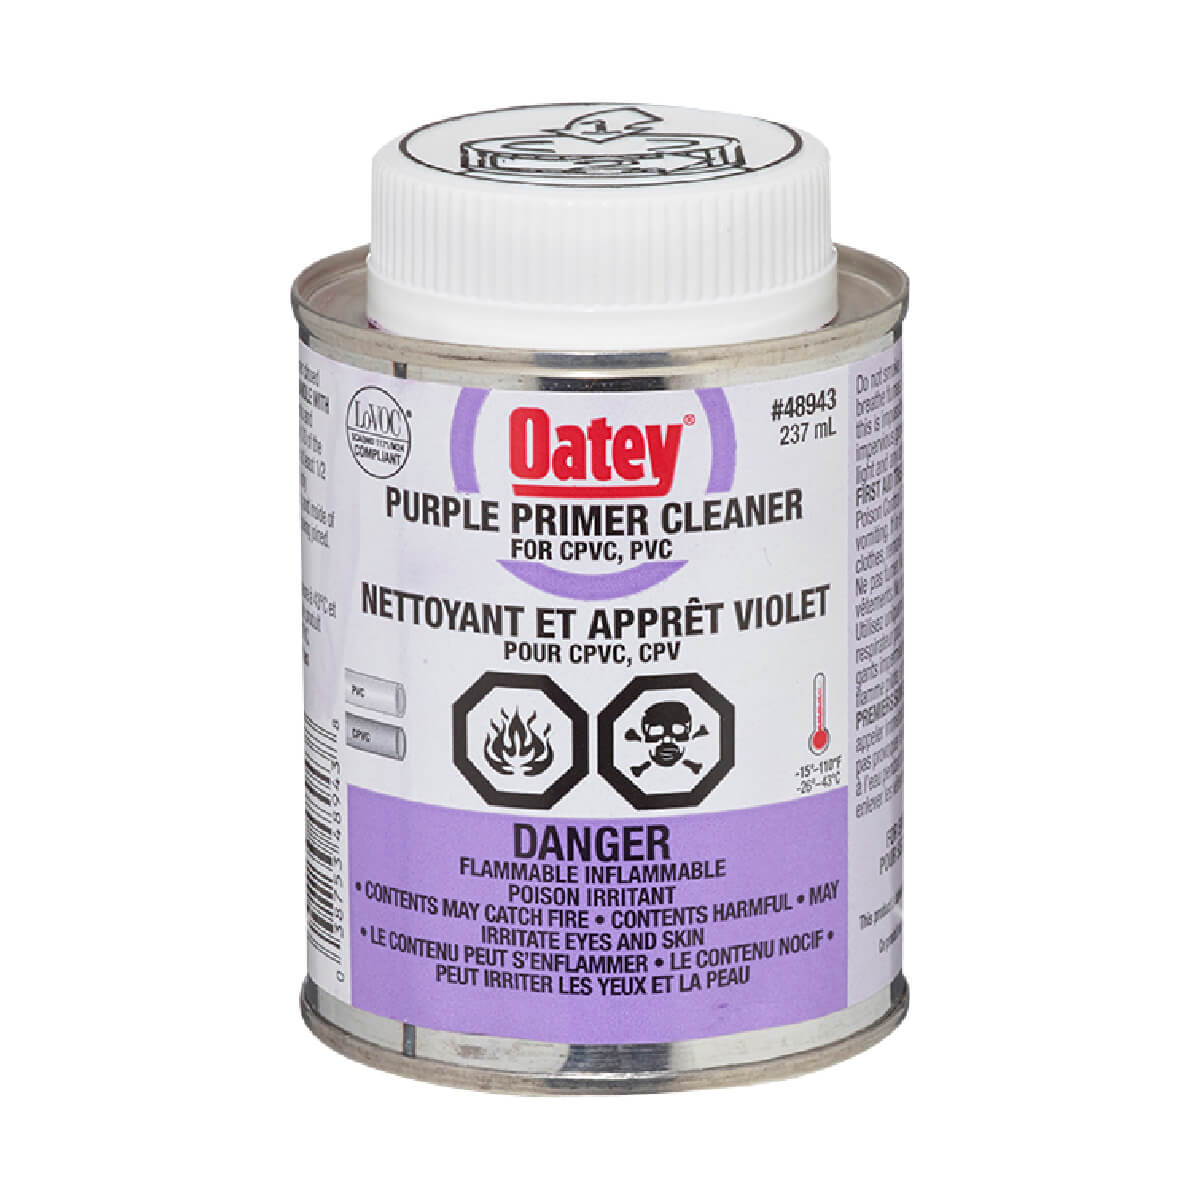 Oatey Purple Primer and Cleaner for CPVC/PVC - 237 ml